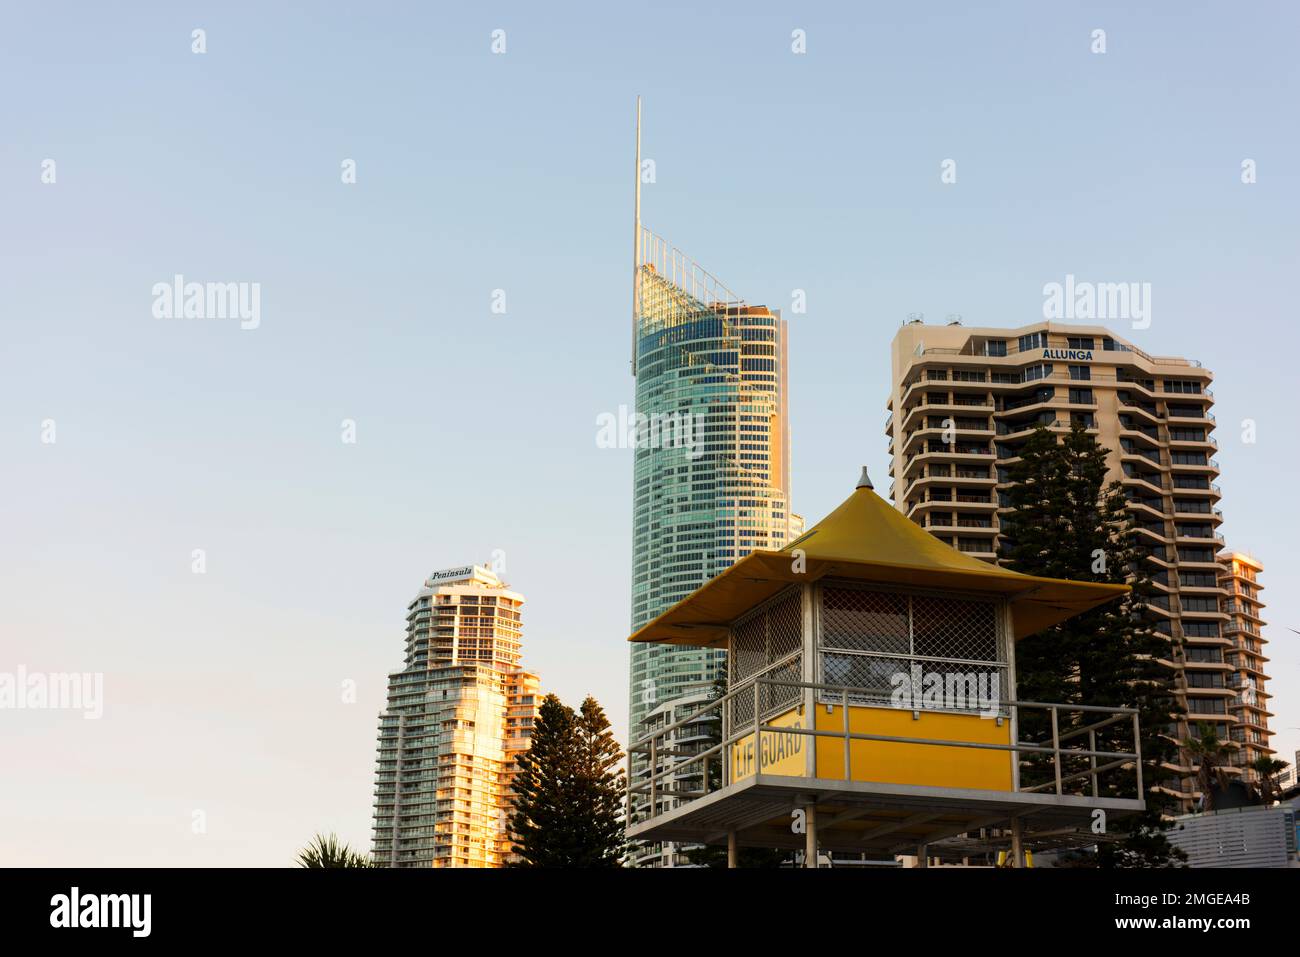 Surf lifesaver hut on the beach at Surfers Paradise with high rise apartment buildings in background. Stock Photo